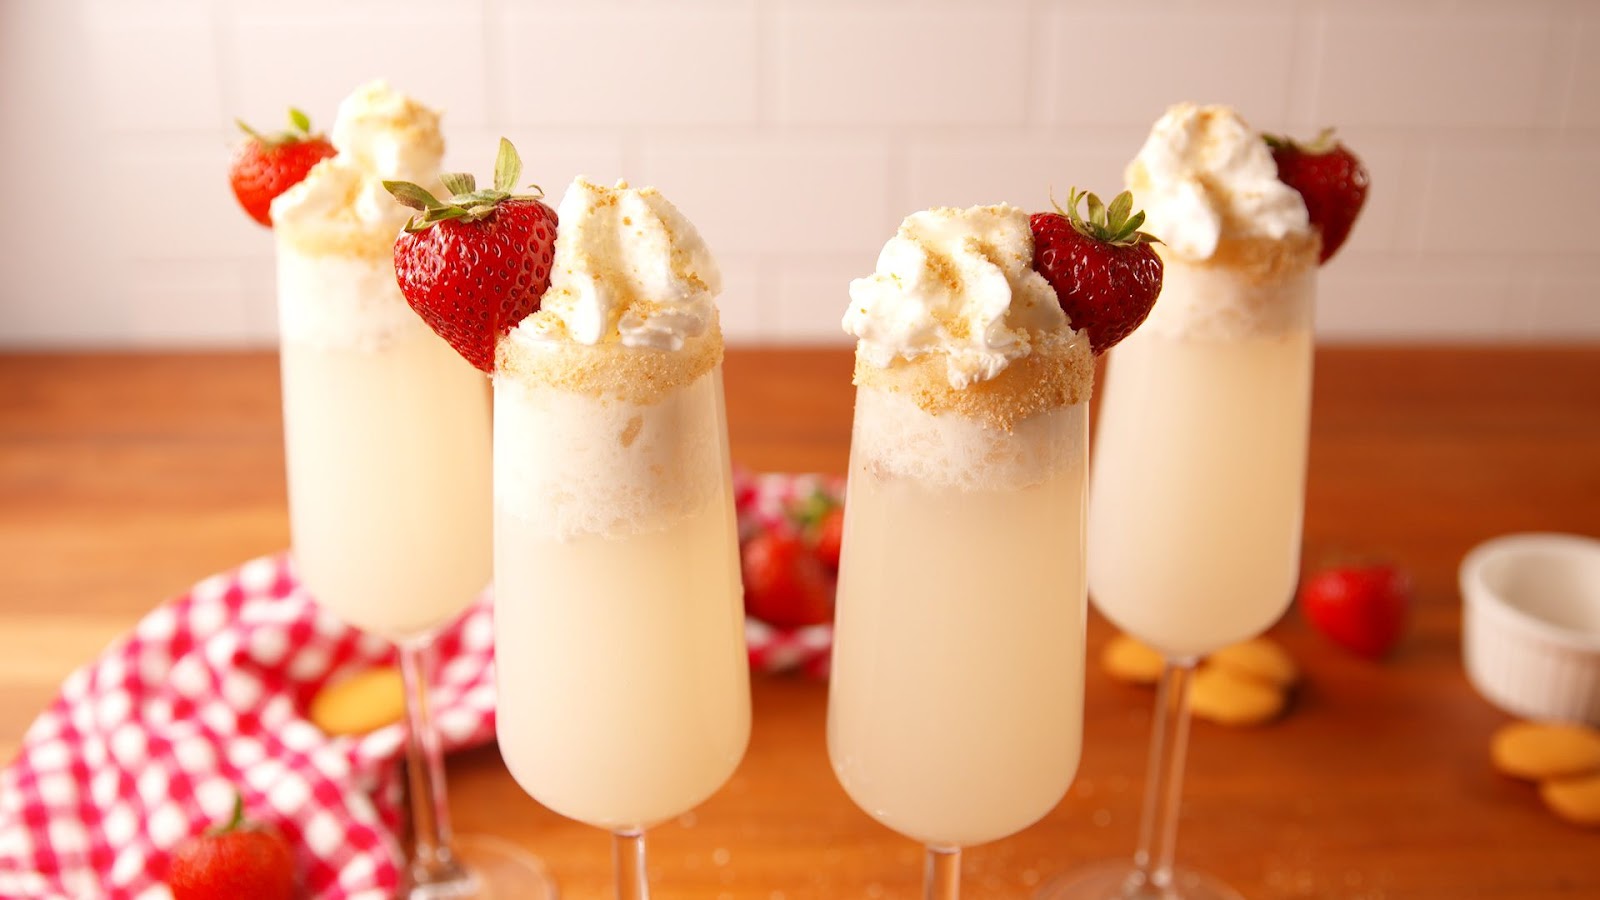 STRAWBERRY SHORTCAKE MIMOSA #strawberry #drink #party #mimosa #easy